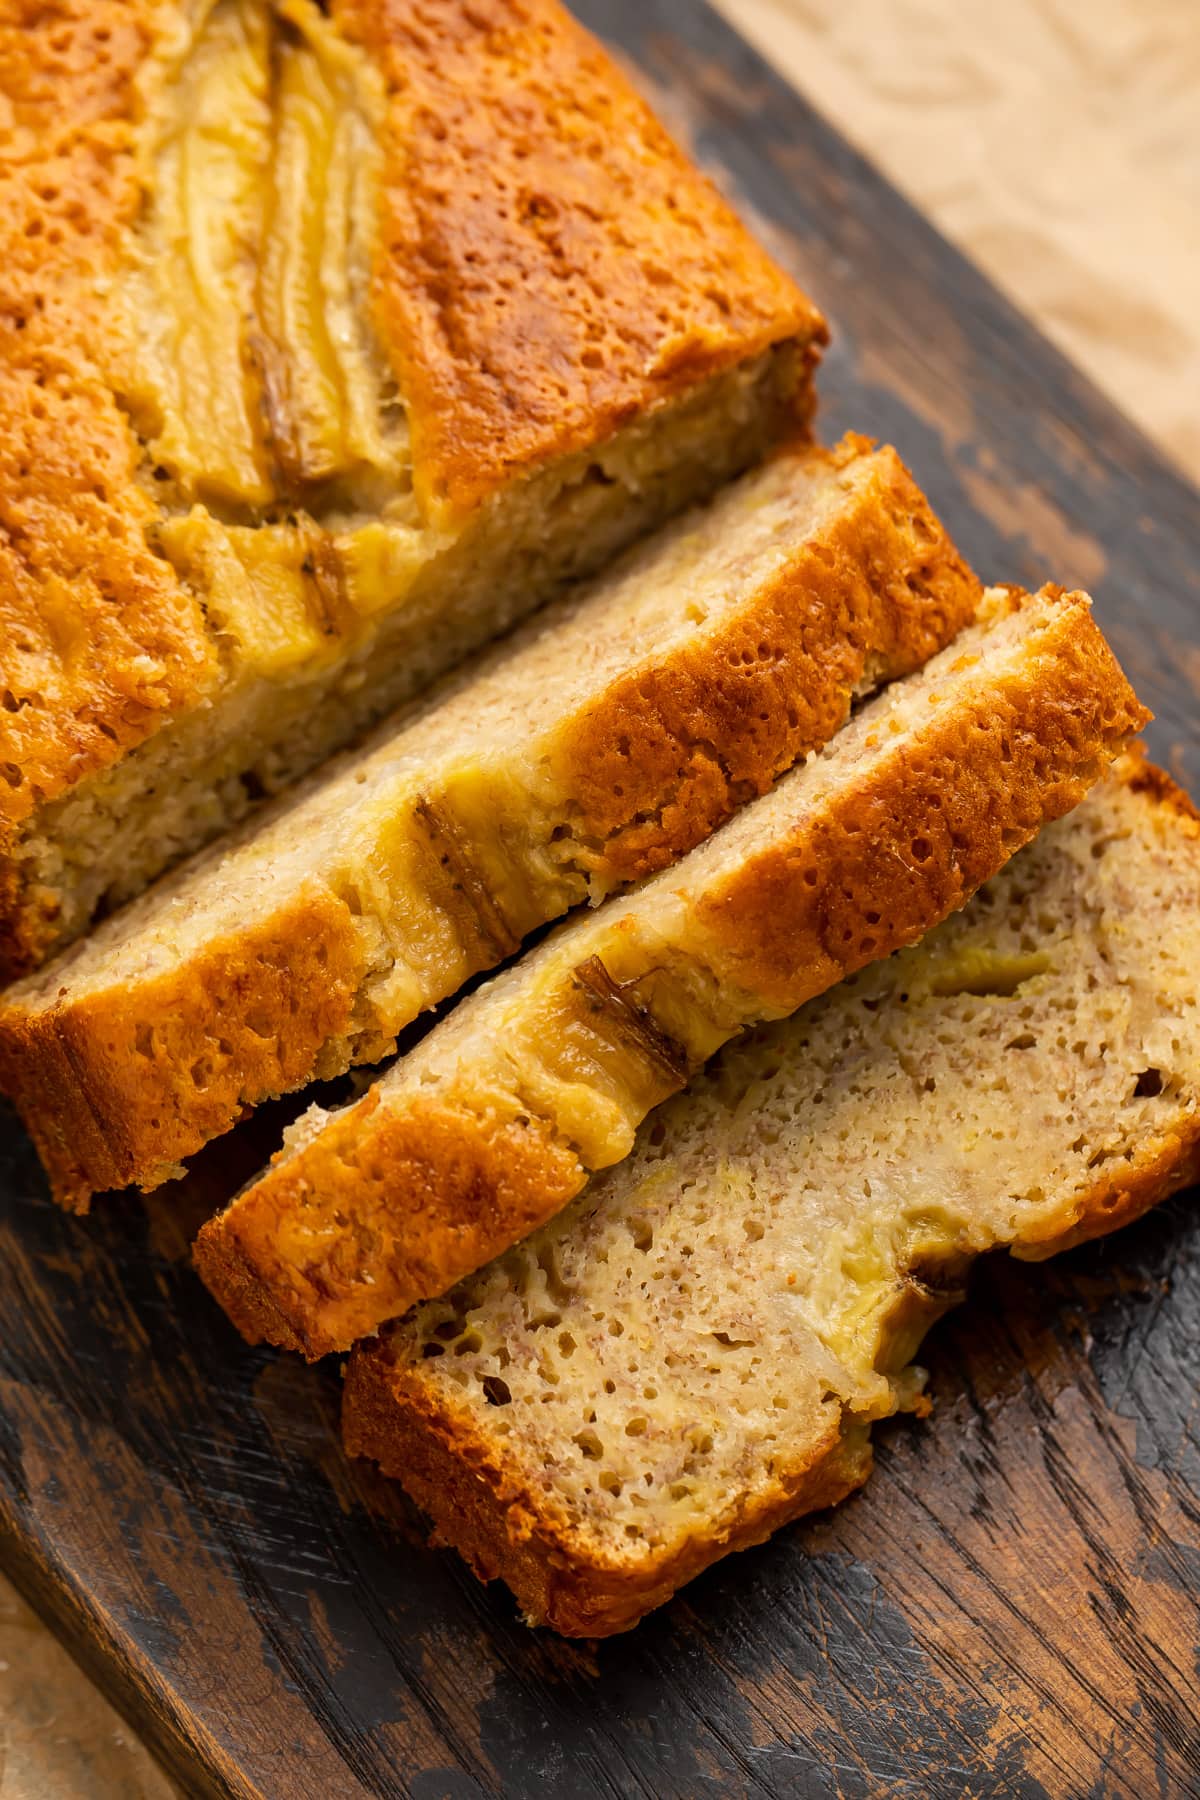 Slices of a loaf of banana bread made with only 4 ingredients.